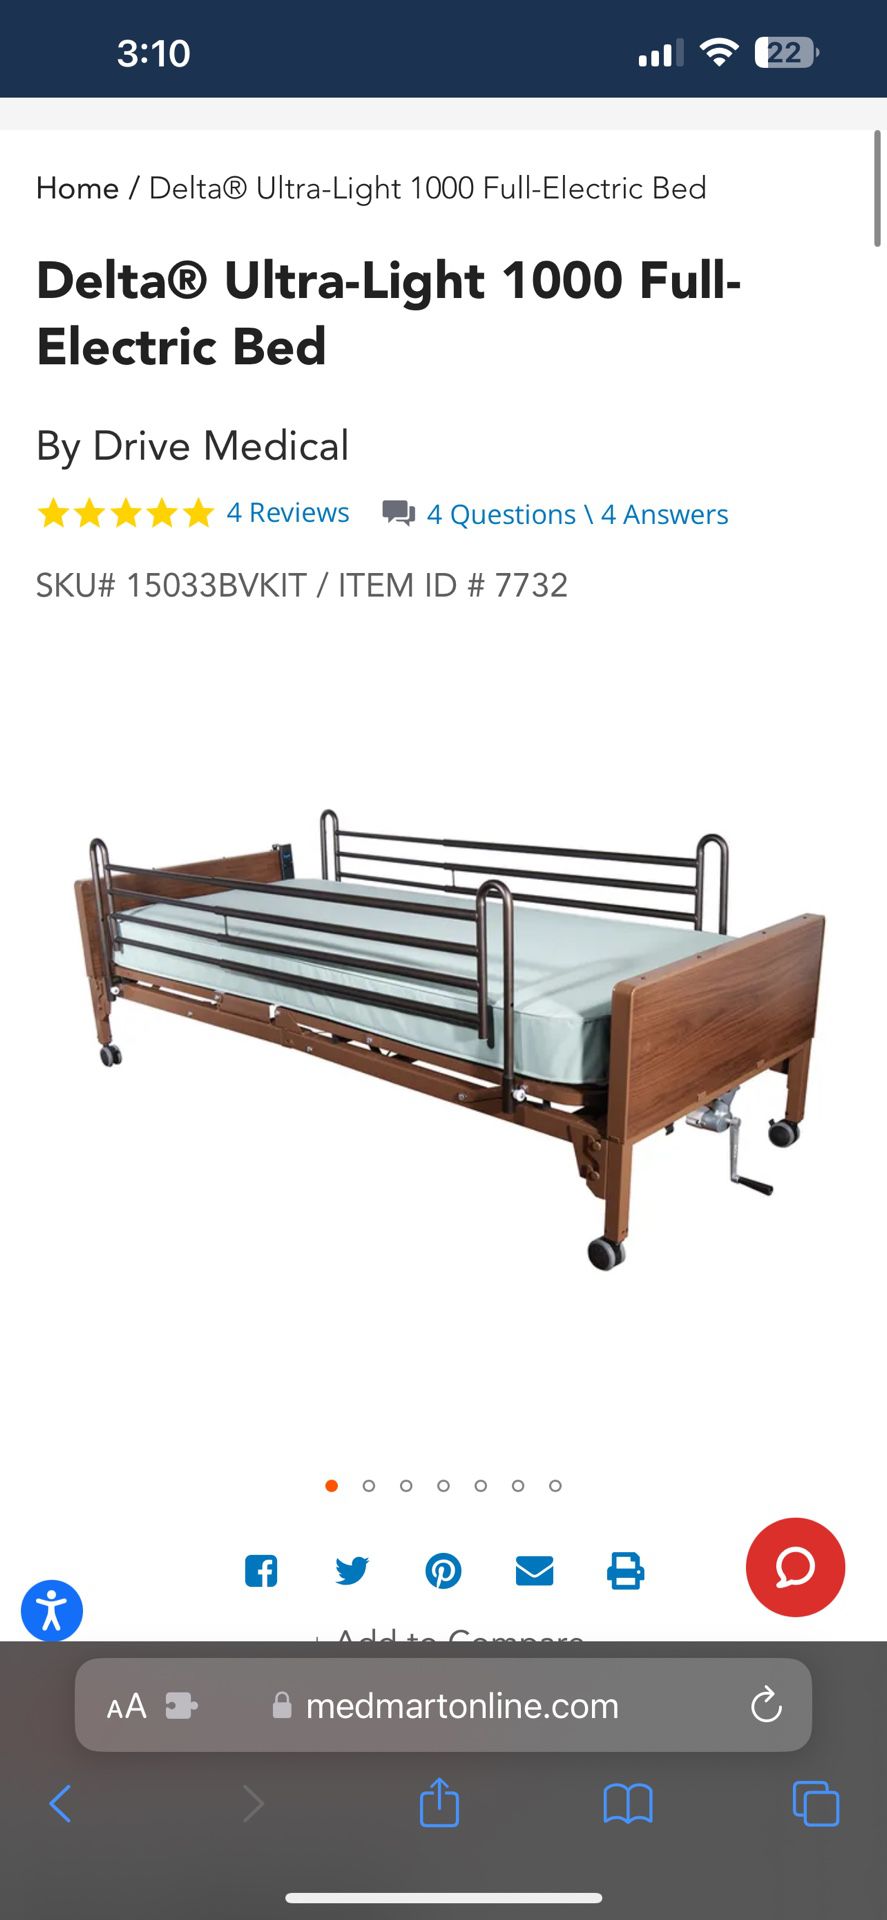  Twin Drive Electrical Bed 